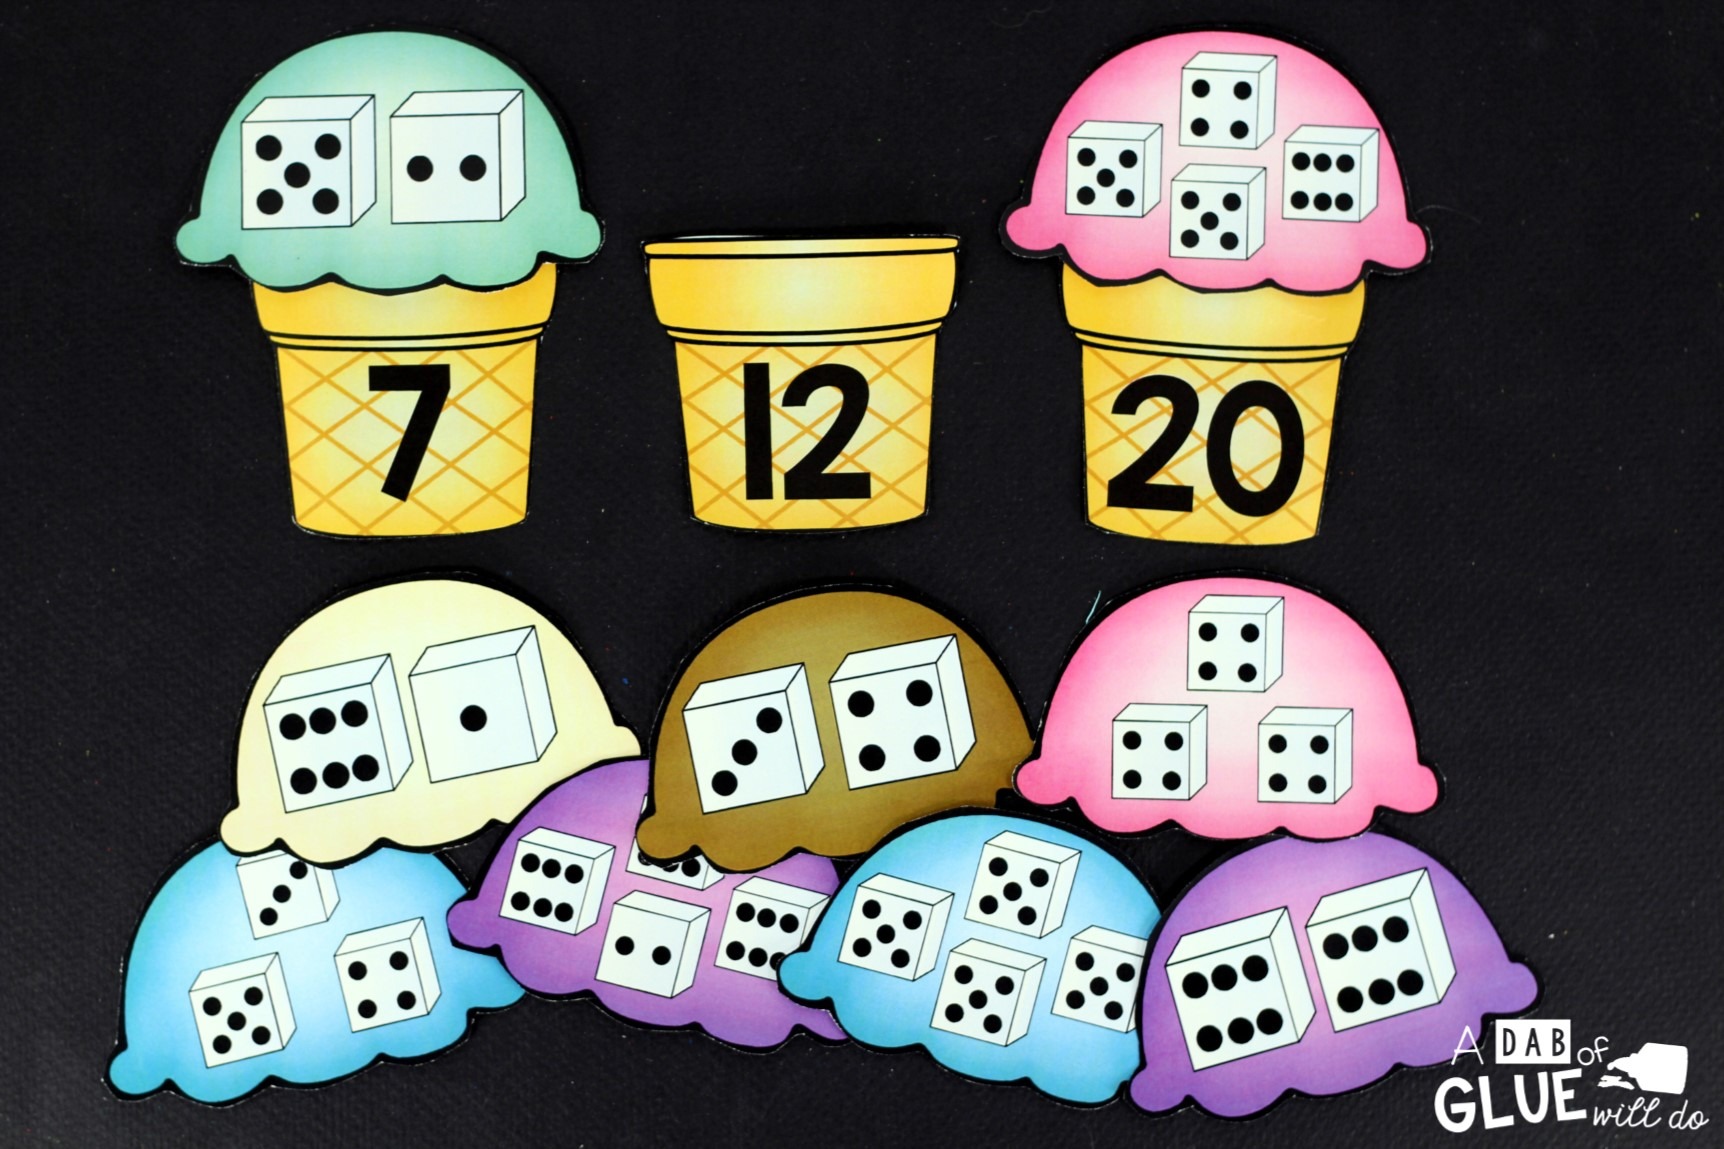 Matching Numbers with Ice Cream includes nine pages of ice cream scoops, numbers four through 20. Each ice cream cone has a number written on it and each ice cream scoop has two to four dice. Students will count the number of dots on each dice and then match it to the correctly numbered cone.